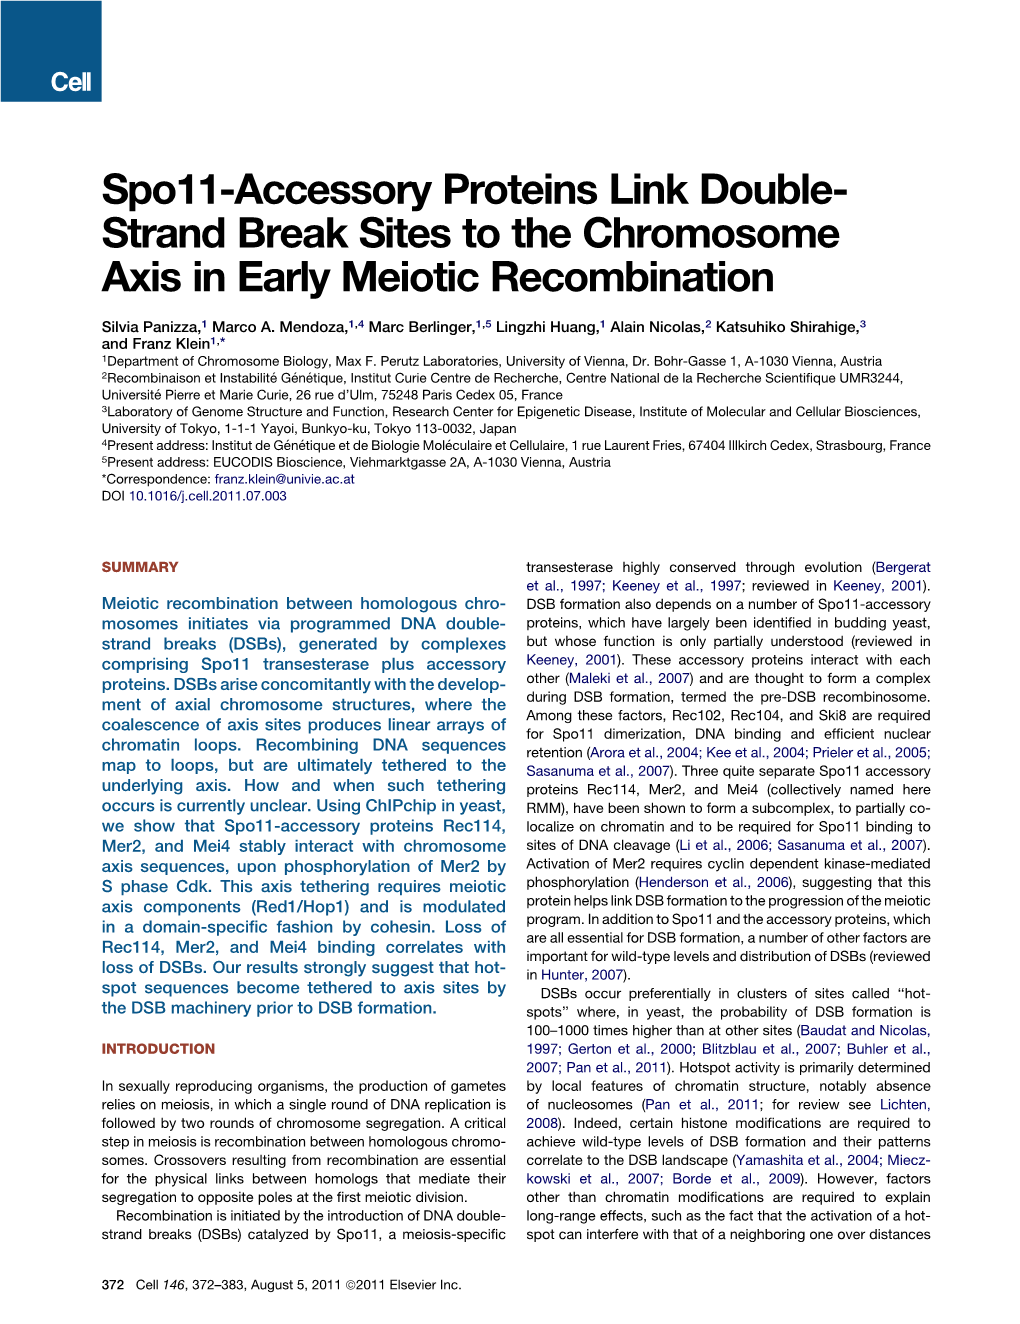 Spo11-Accessory Proteins Link Double-Strand Break Sites to The